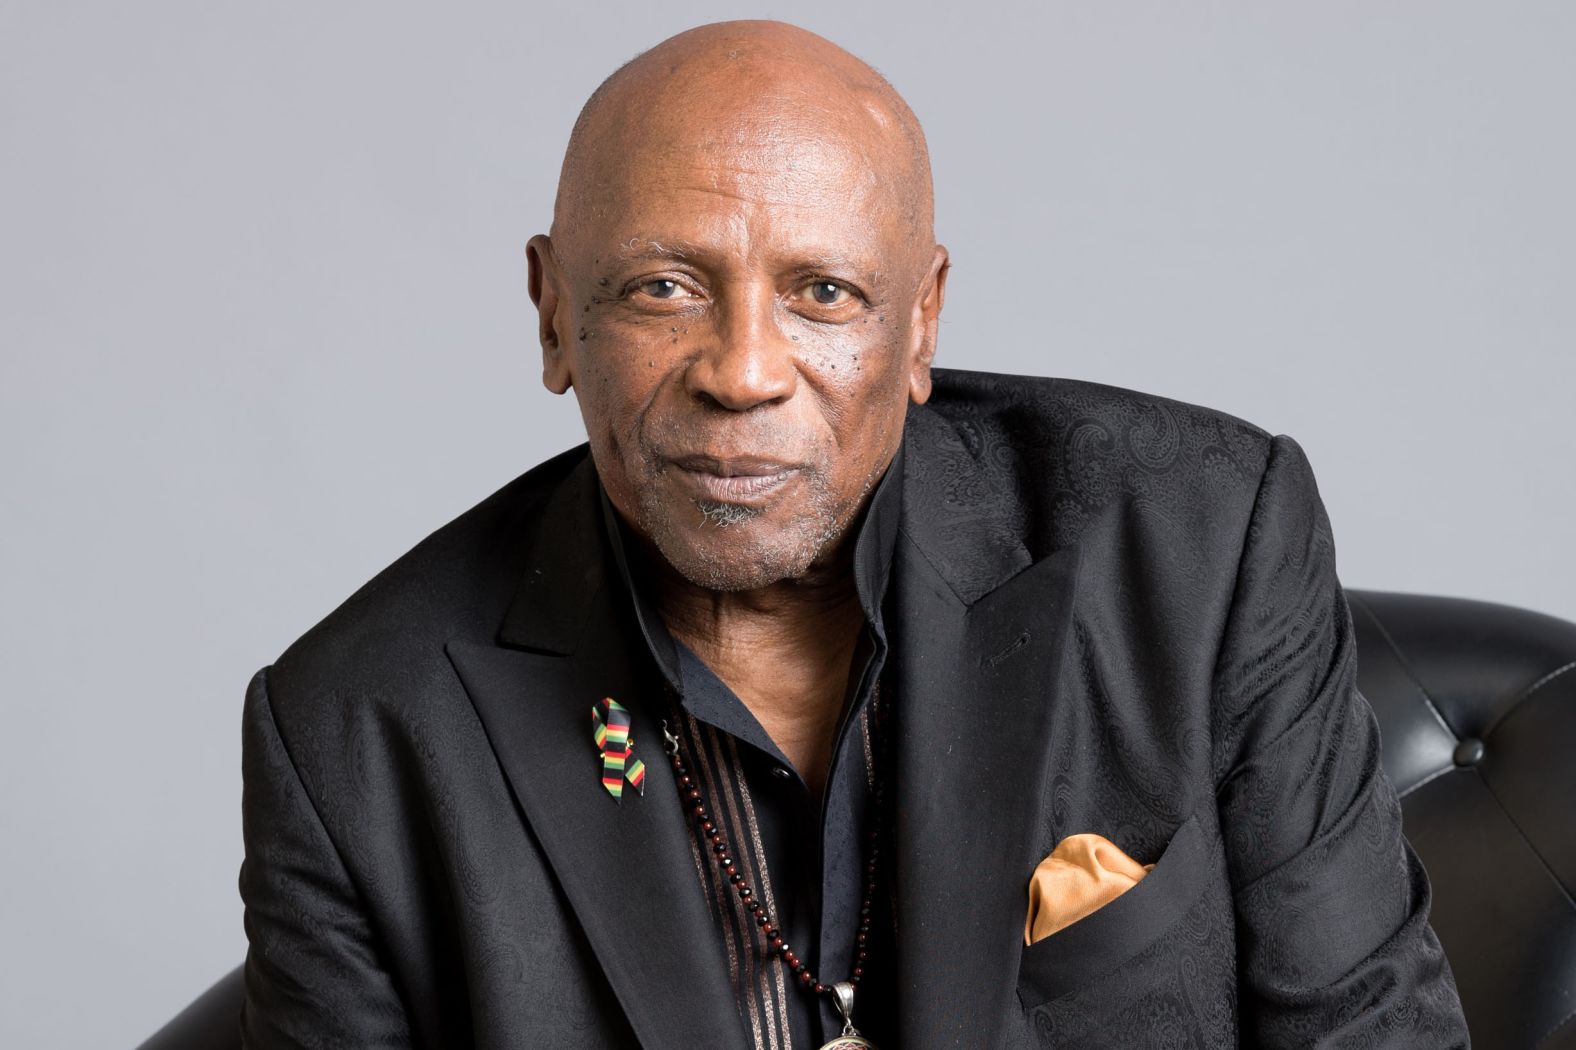 <a href="index.php?page=&url=https%3A%2F%2Fwww.cnn.com%2F2024%2F03%2F29%2Fentertainment%2Flouis-gossett-jr-death%2Findex.html" target="_blank">Louis Gossett Jr.</a>, a star of film and television who won an Academy Award for his performance in "An Officer and a Gentleman," died Friday, March 29, according to a statement from his family. He was 87.